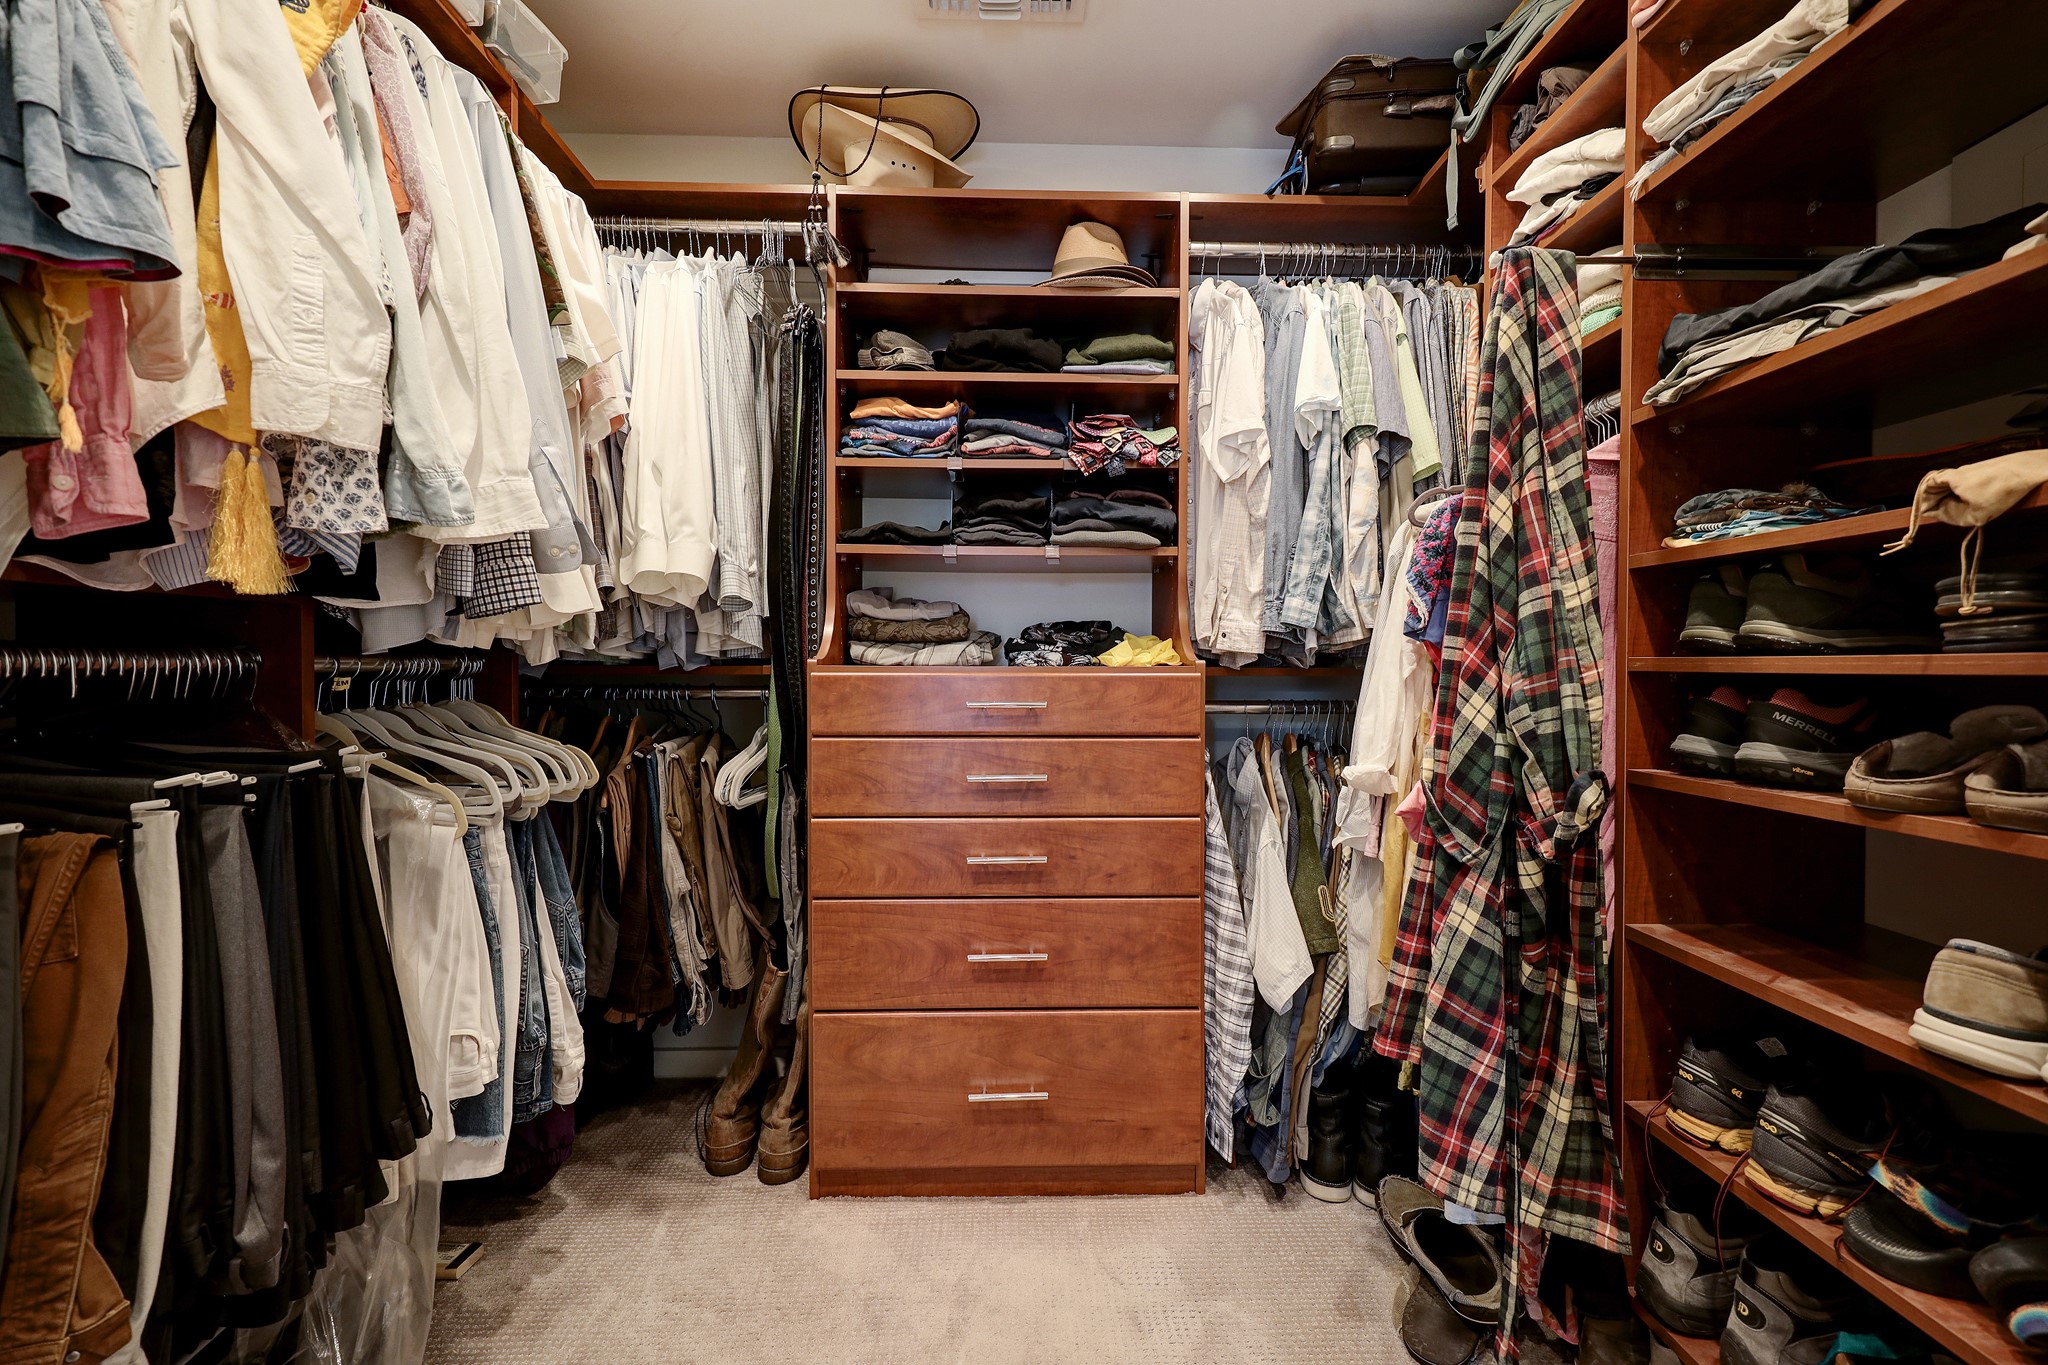 The custom built-ins in the large primary closet maximize the storage.